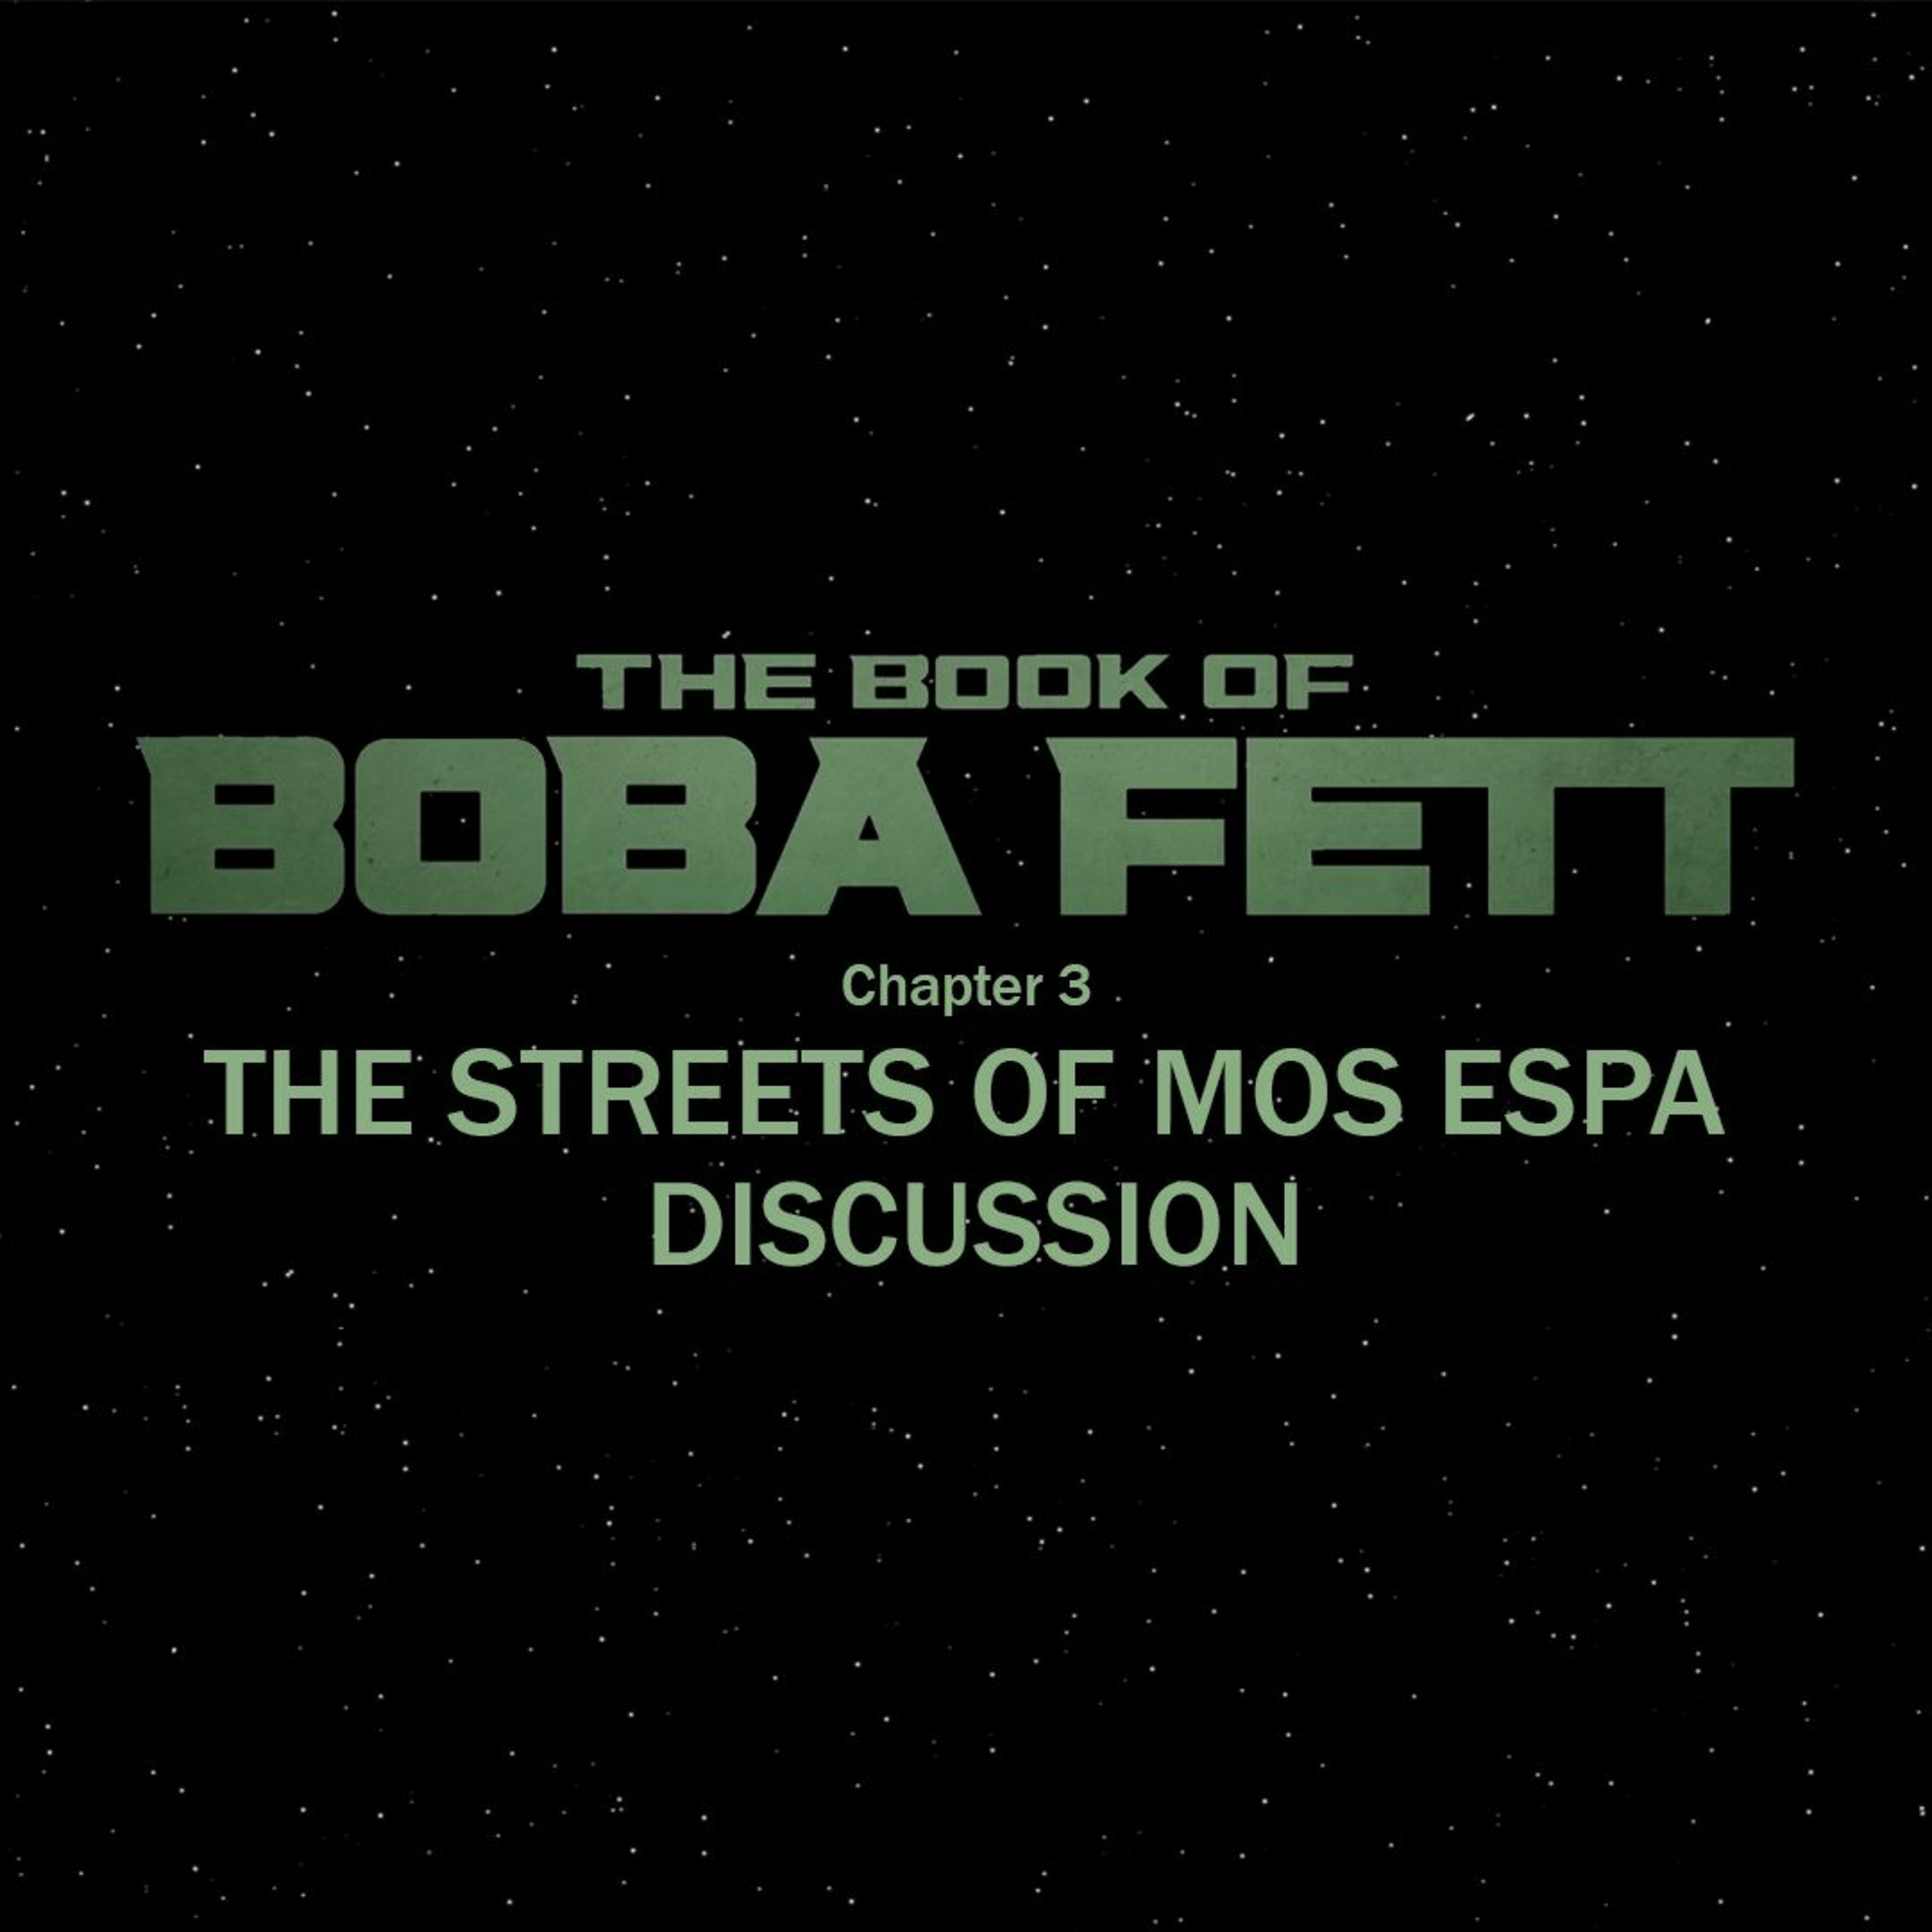 The Book of Boba Fett Chapter 3 - The Streets of Mos Espa